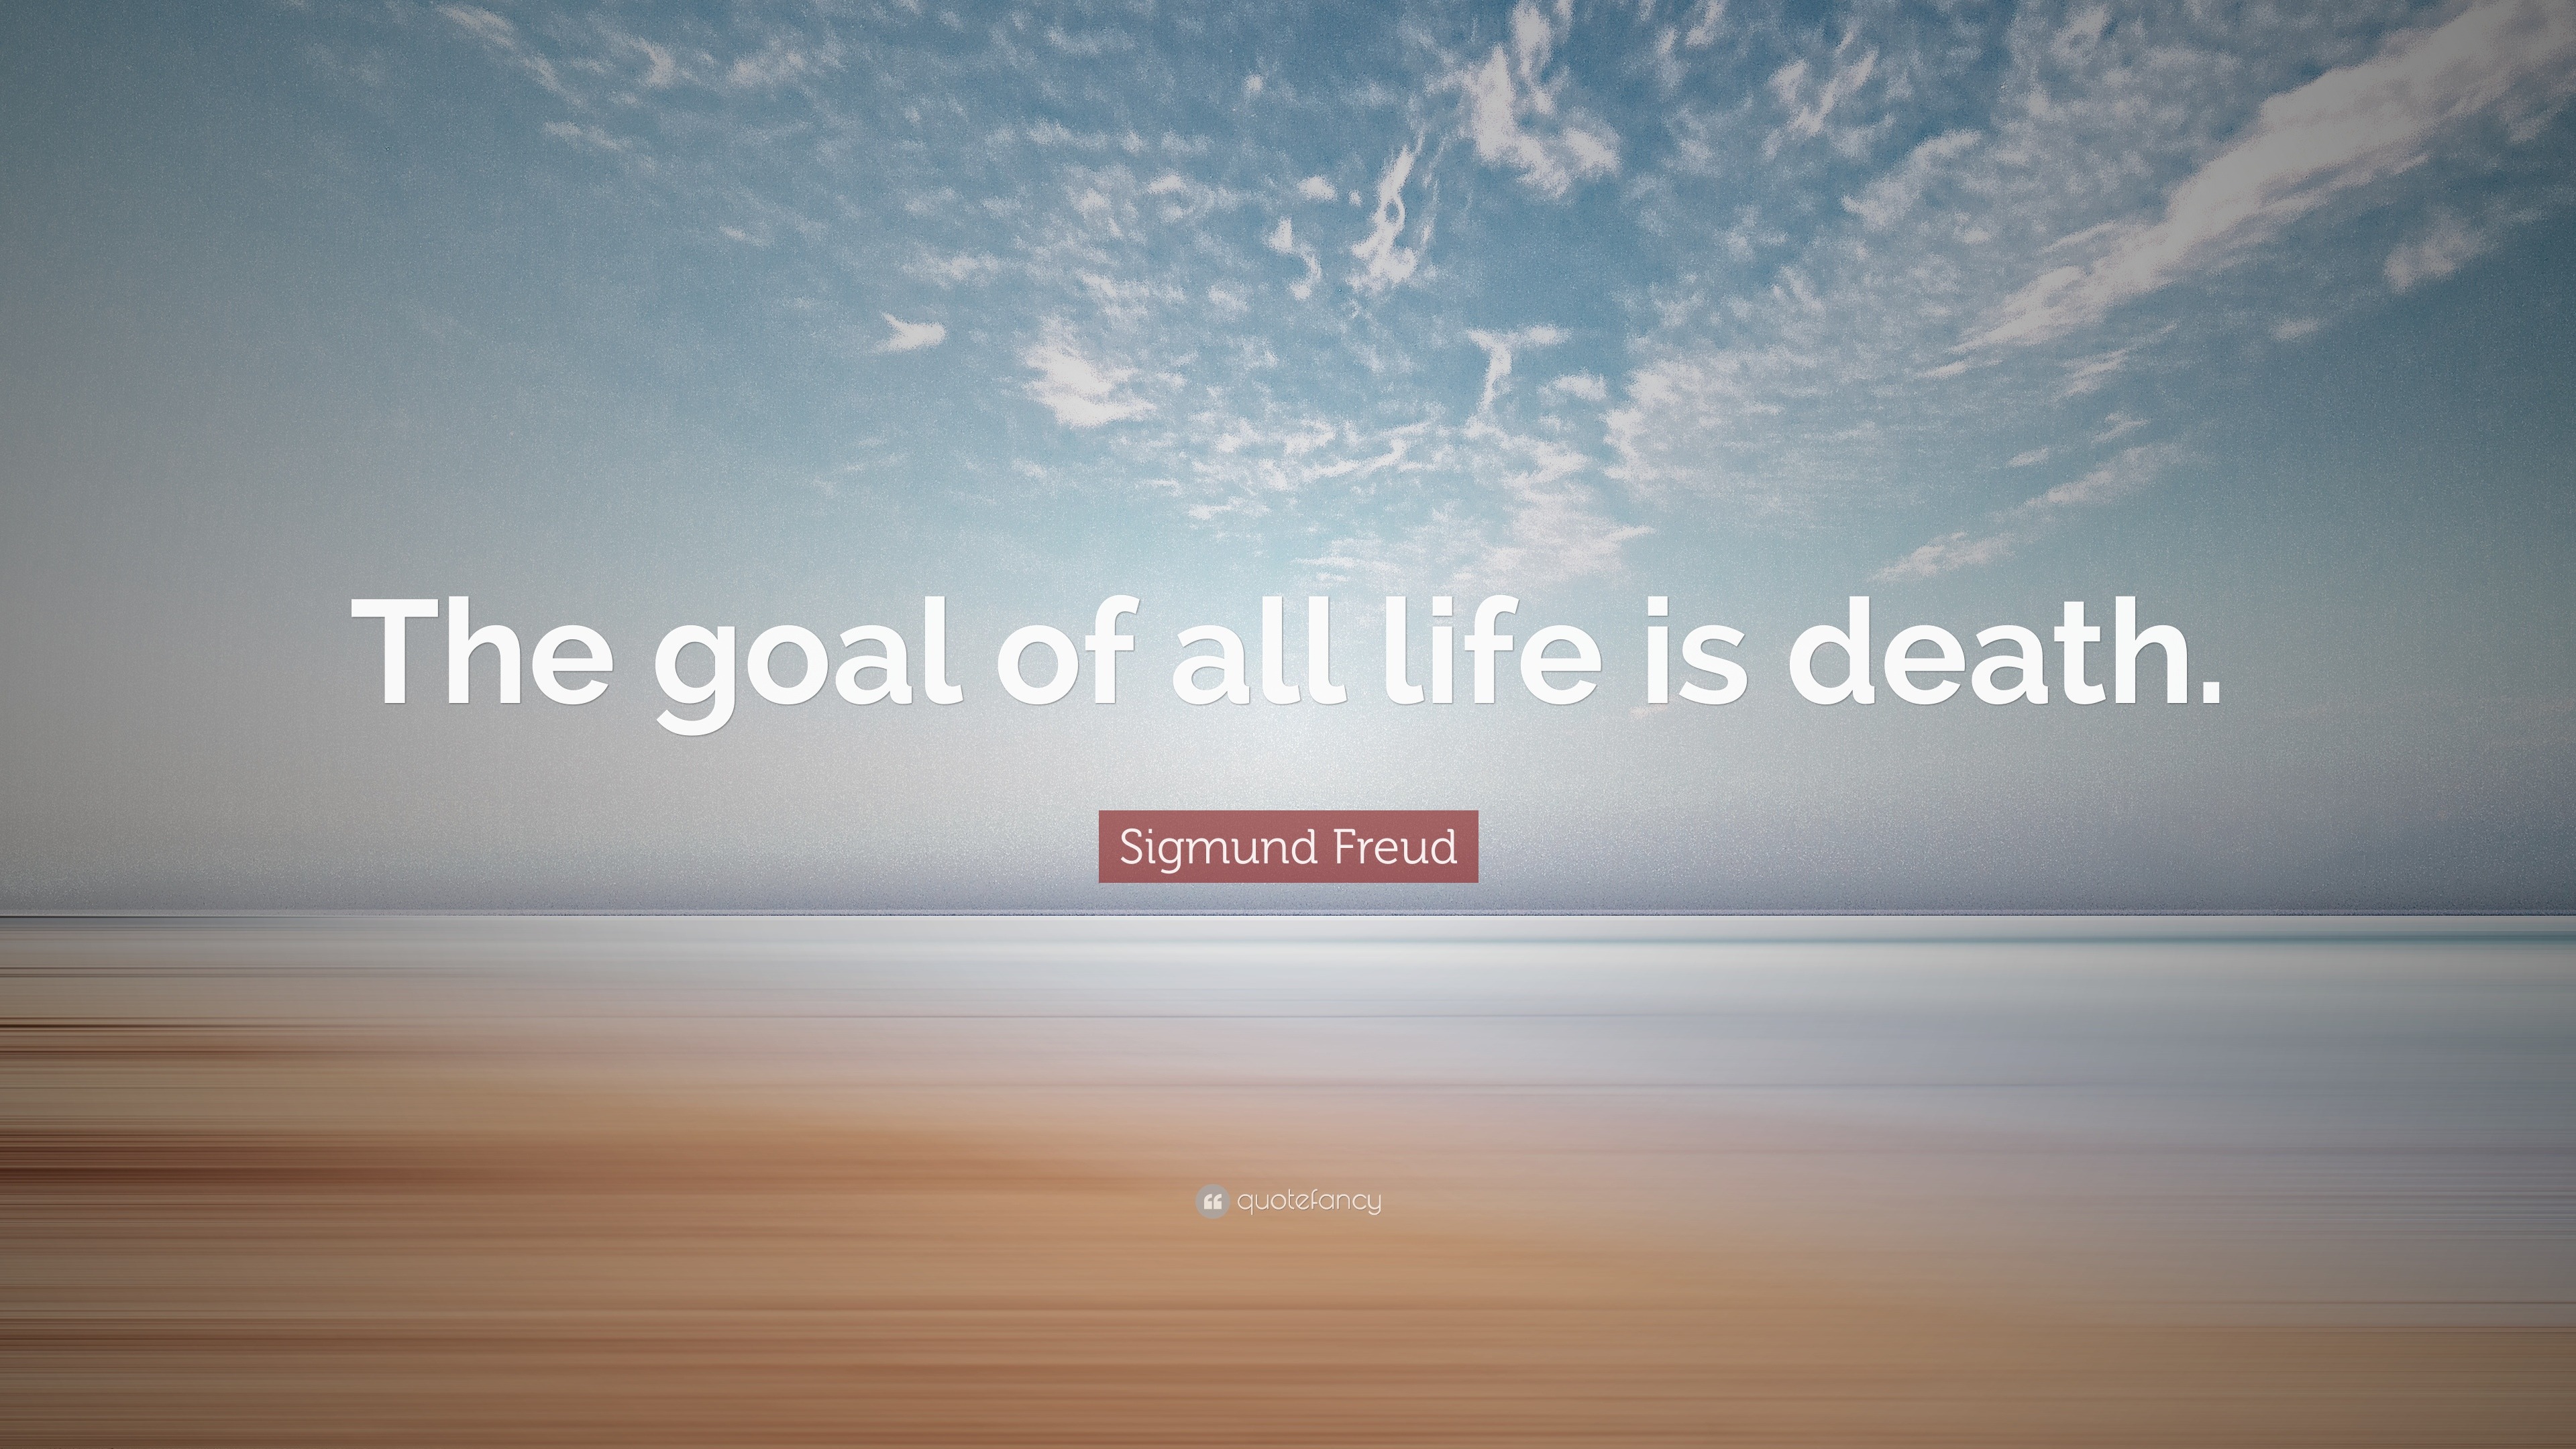 Sigmund Freud Quote “The goal of all life is ”